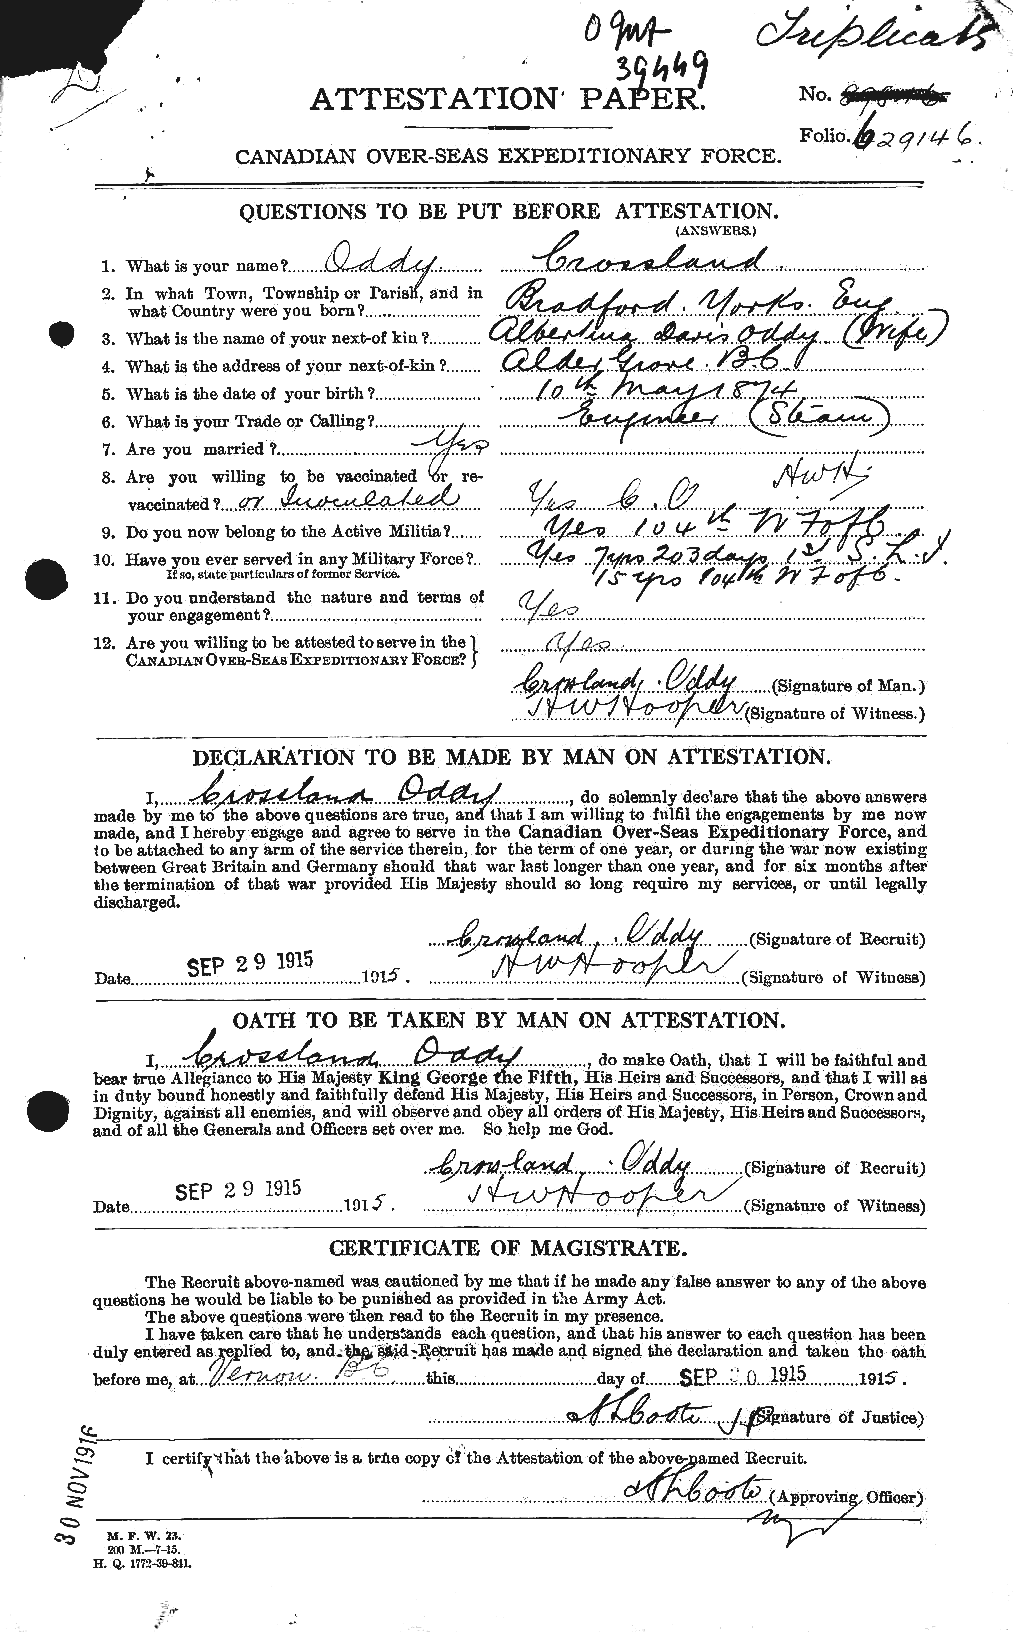 Personnel Records of the First World War - CEF 552937a